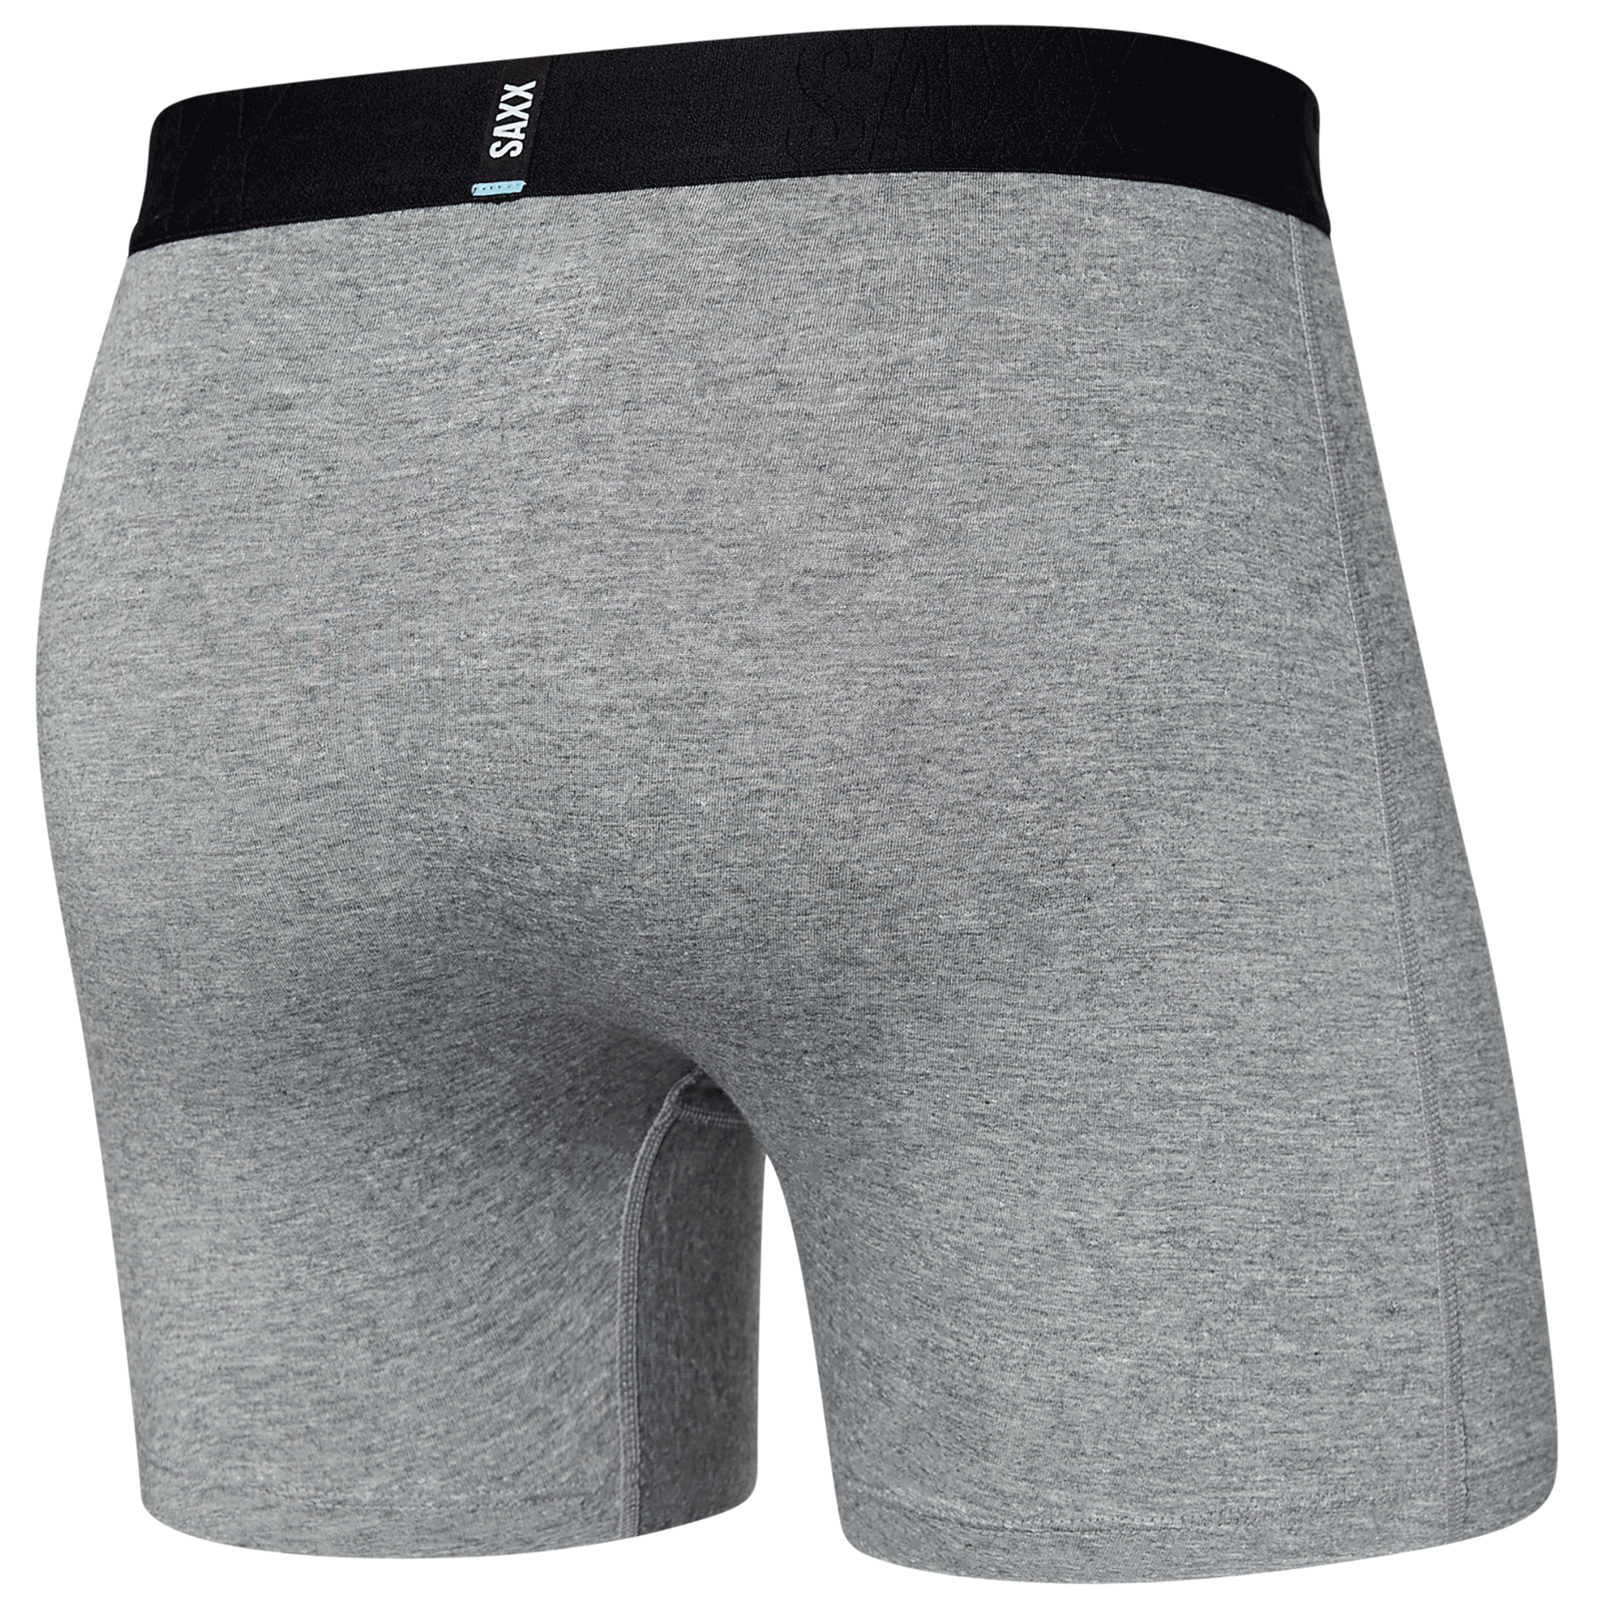 Men's cooling / sport boxer briefs with a fly SAXX DROPTEMP COOL